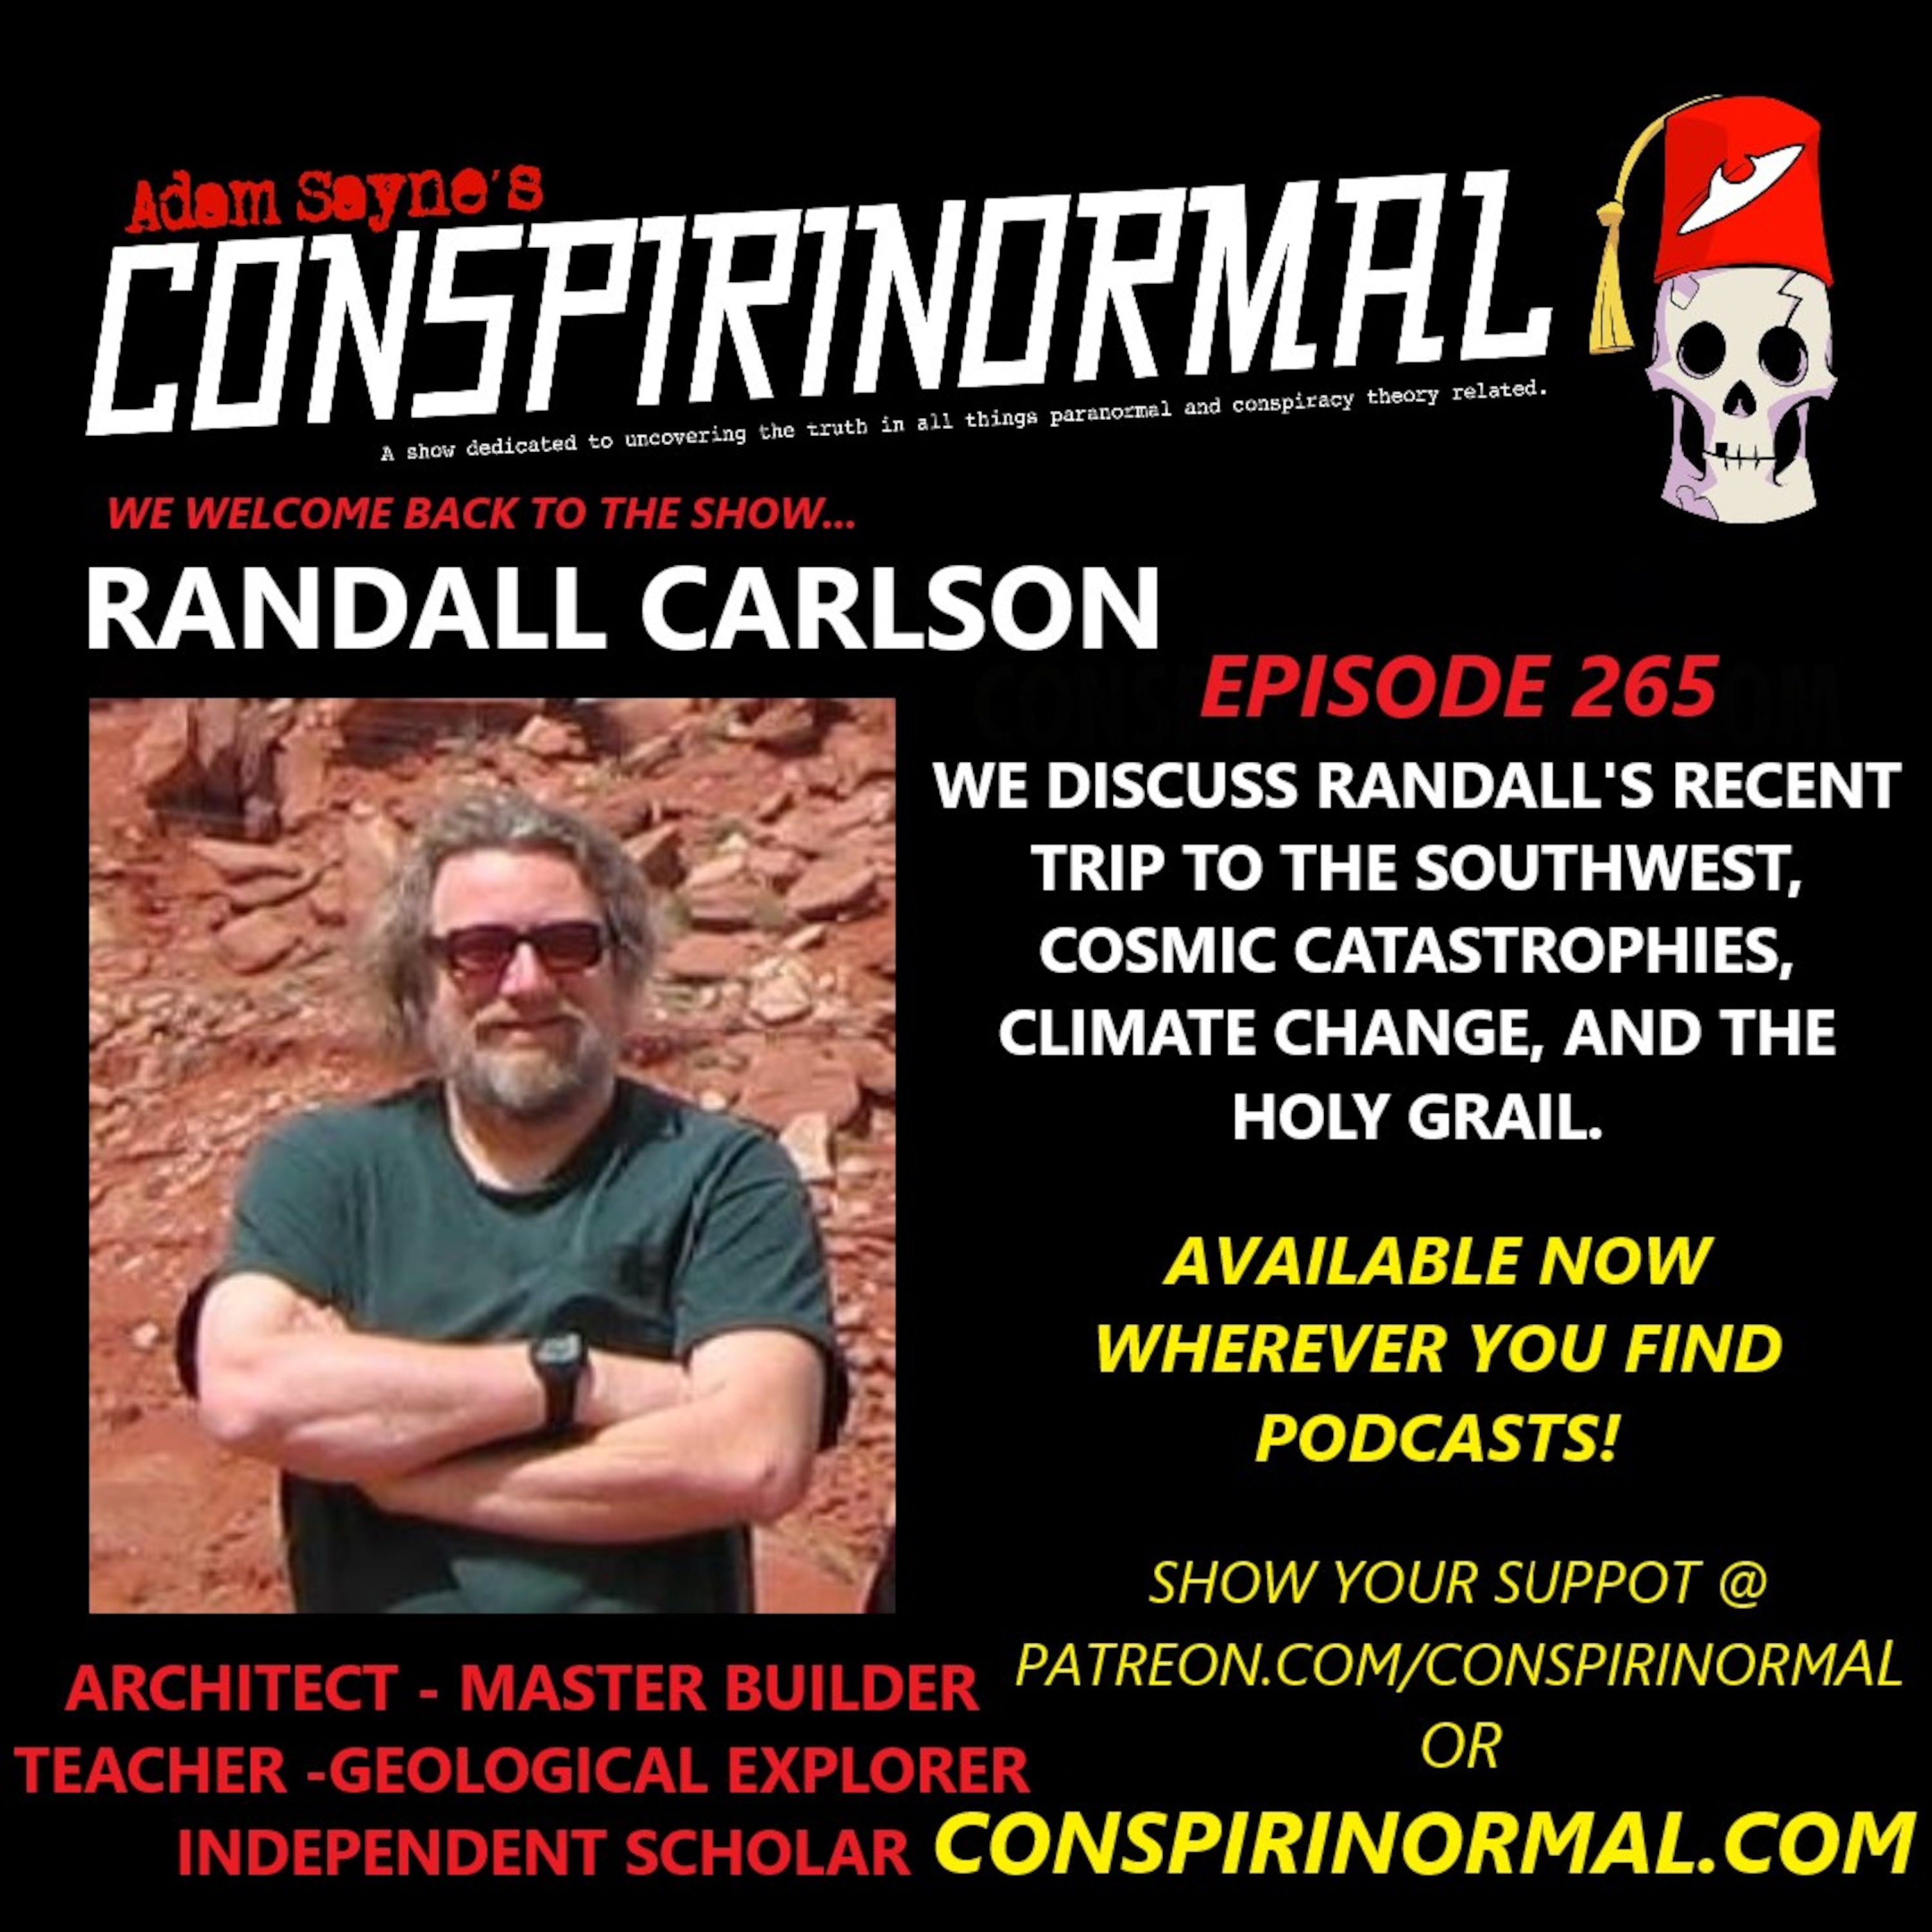 Conspirinormal Episode 265- Randall Carlson 3 (Cosmic Catastrophes, Climate Change, and the Holy Grail)